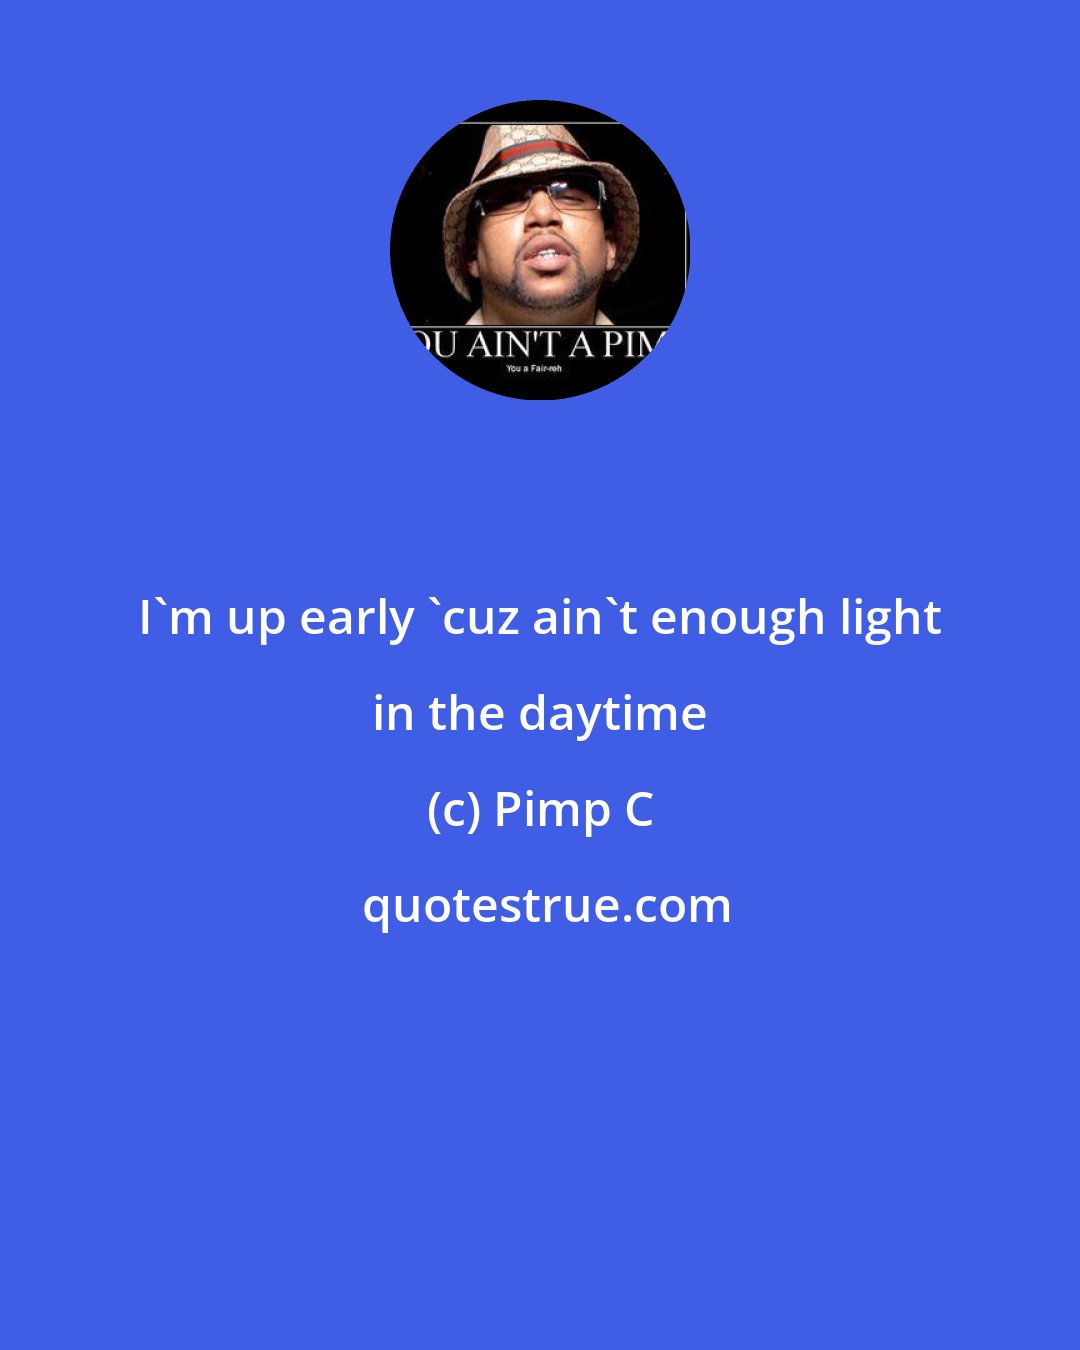 Pimp C: I'm up early 'cuz ain't enough light in the daytime